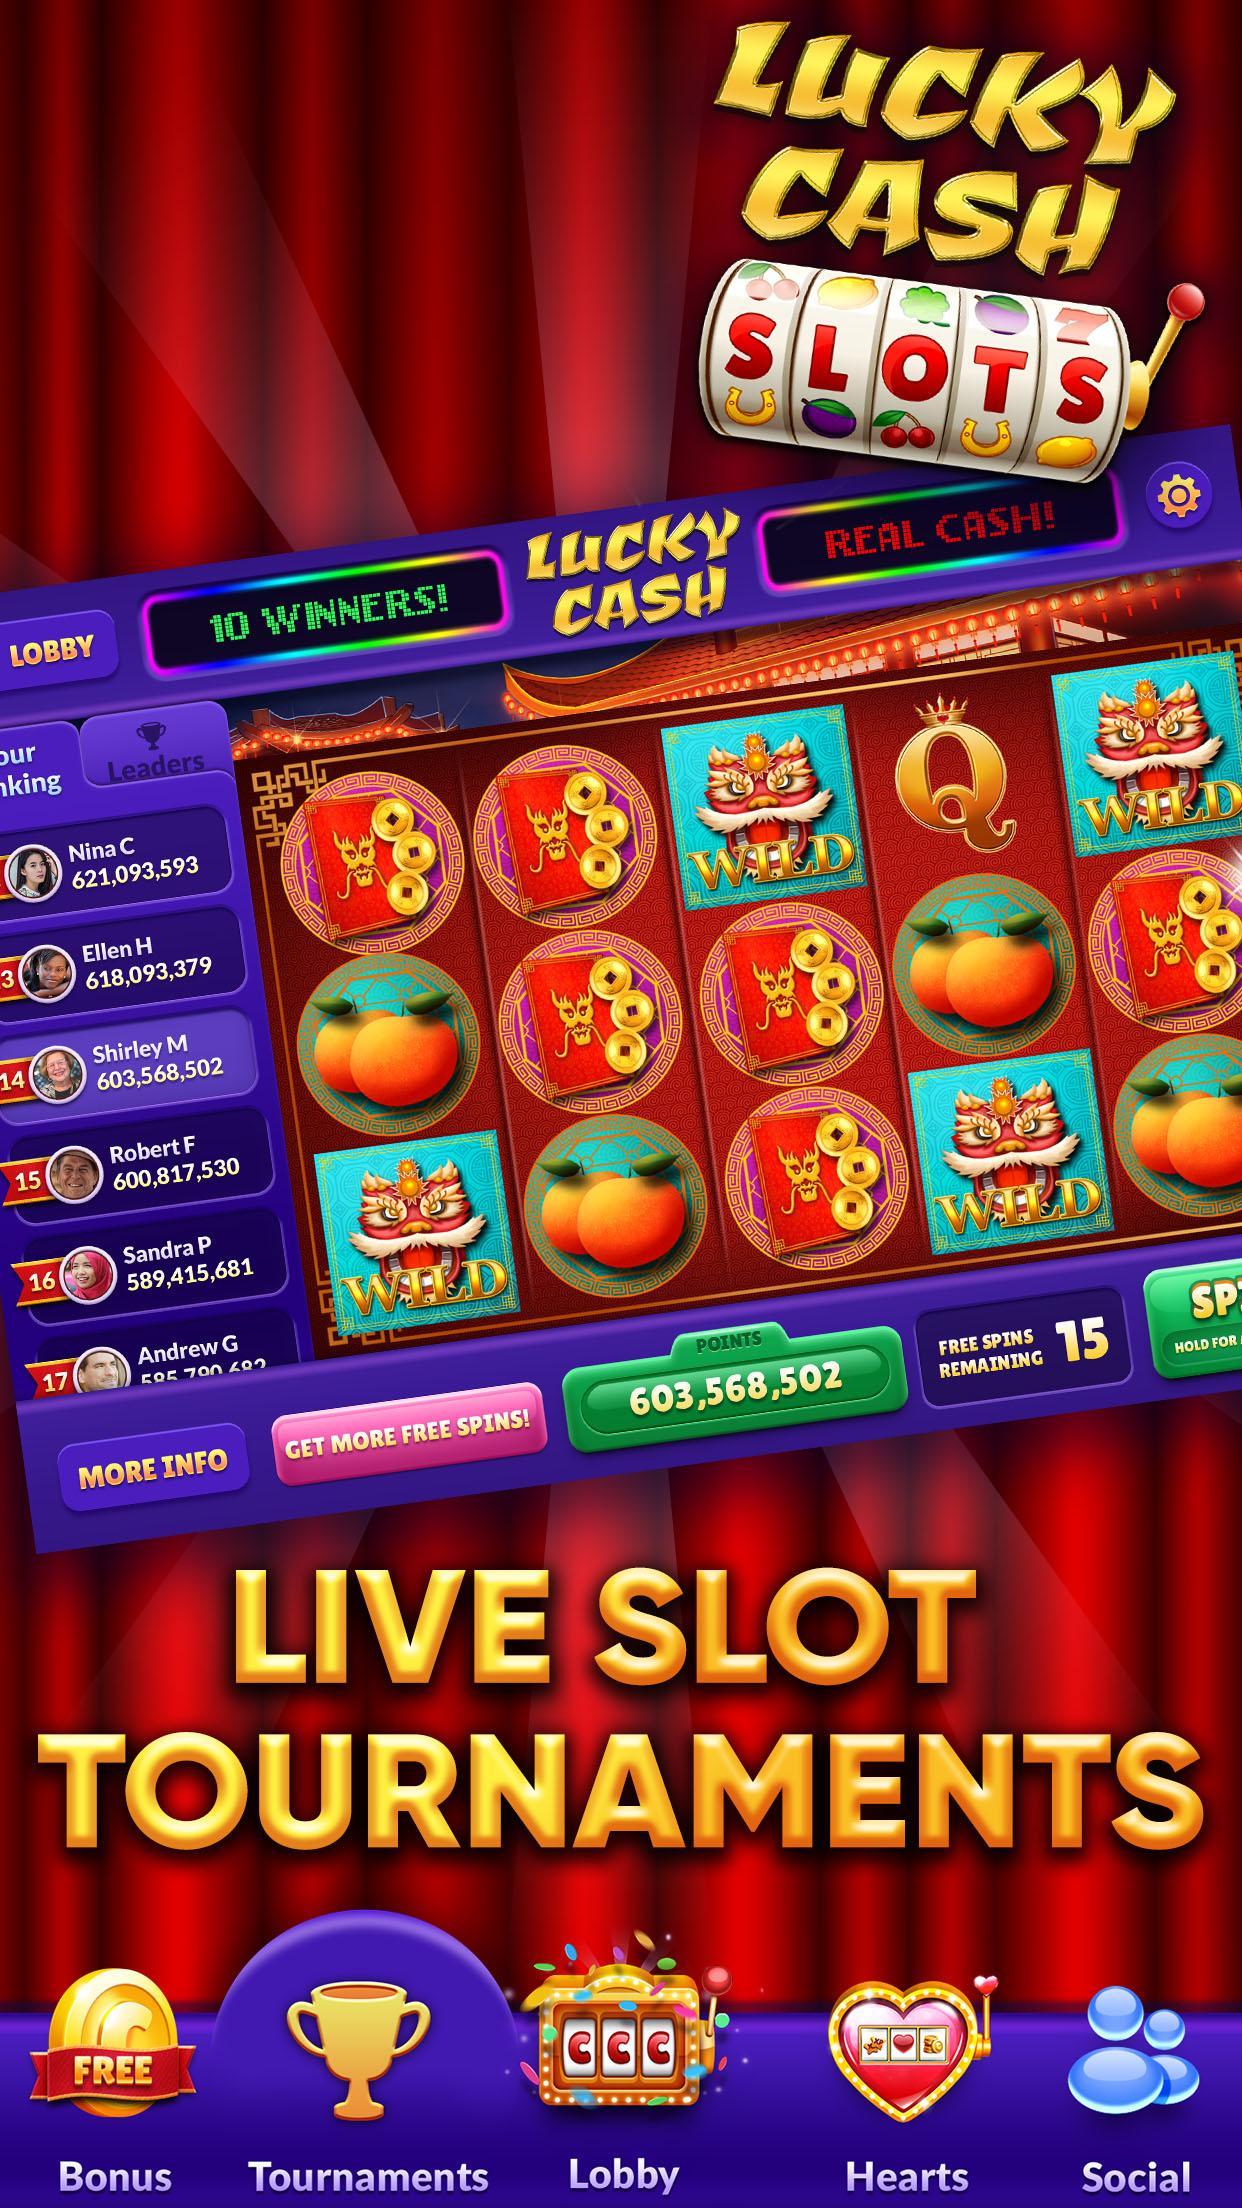 57 Top Pictures Free Slot Machine Apps To Win Real Money - The Money Game ™ Slot Machine - Play Free Online Game ...